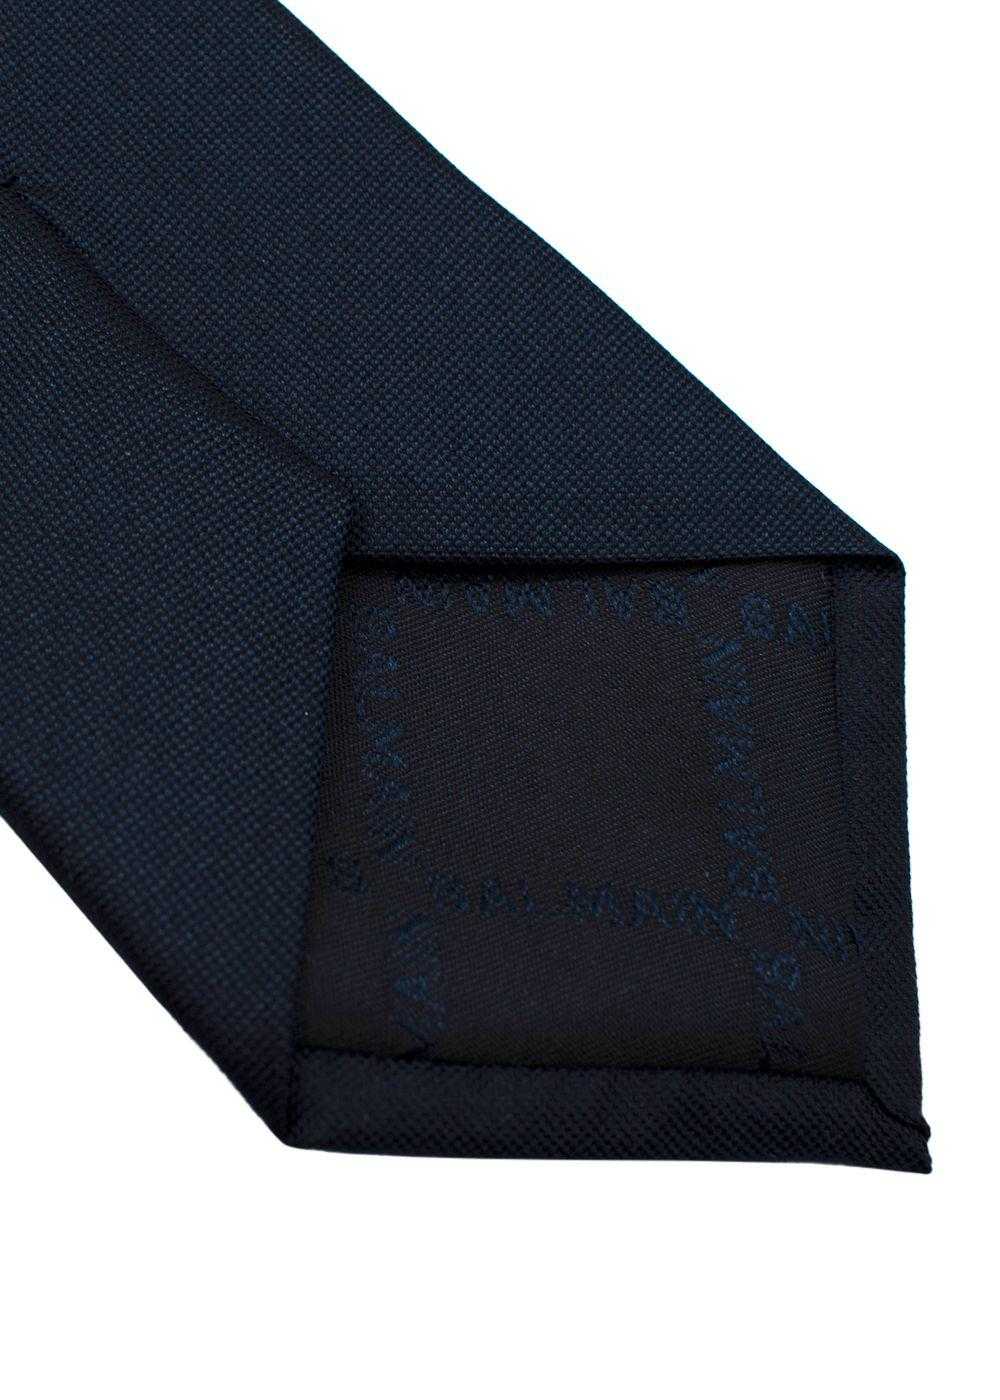 Managed by hewi Balmain Navy Woven Silk Tie - image 5